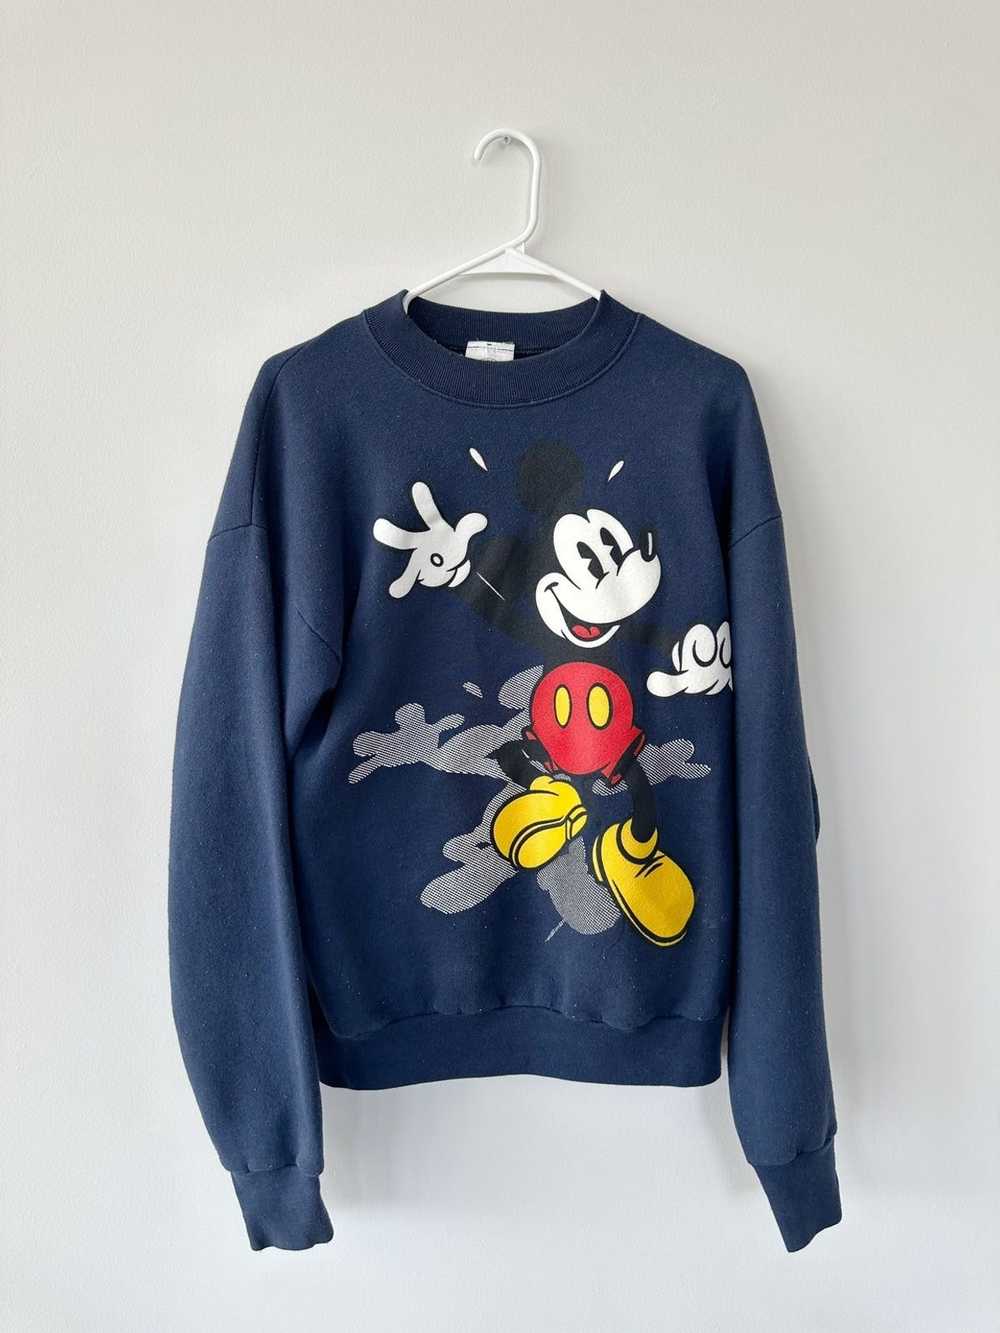 Mickey Mouse Vintage Mickey Mouse Sweatshirt - image 1